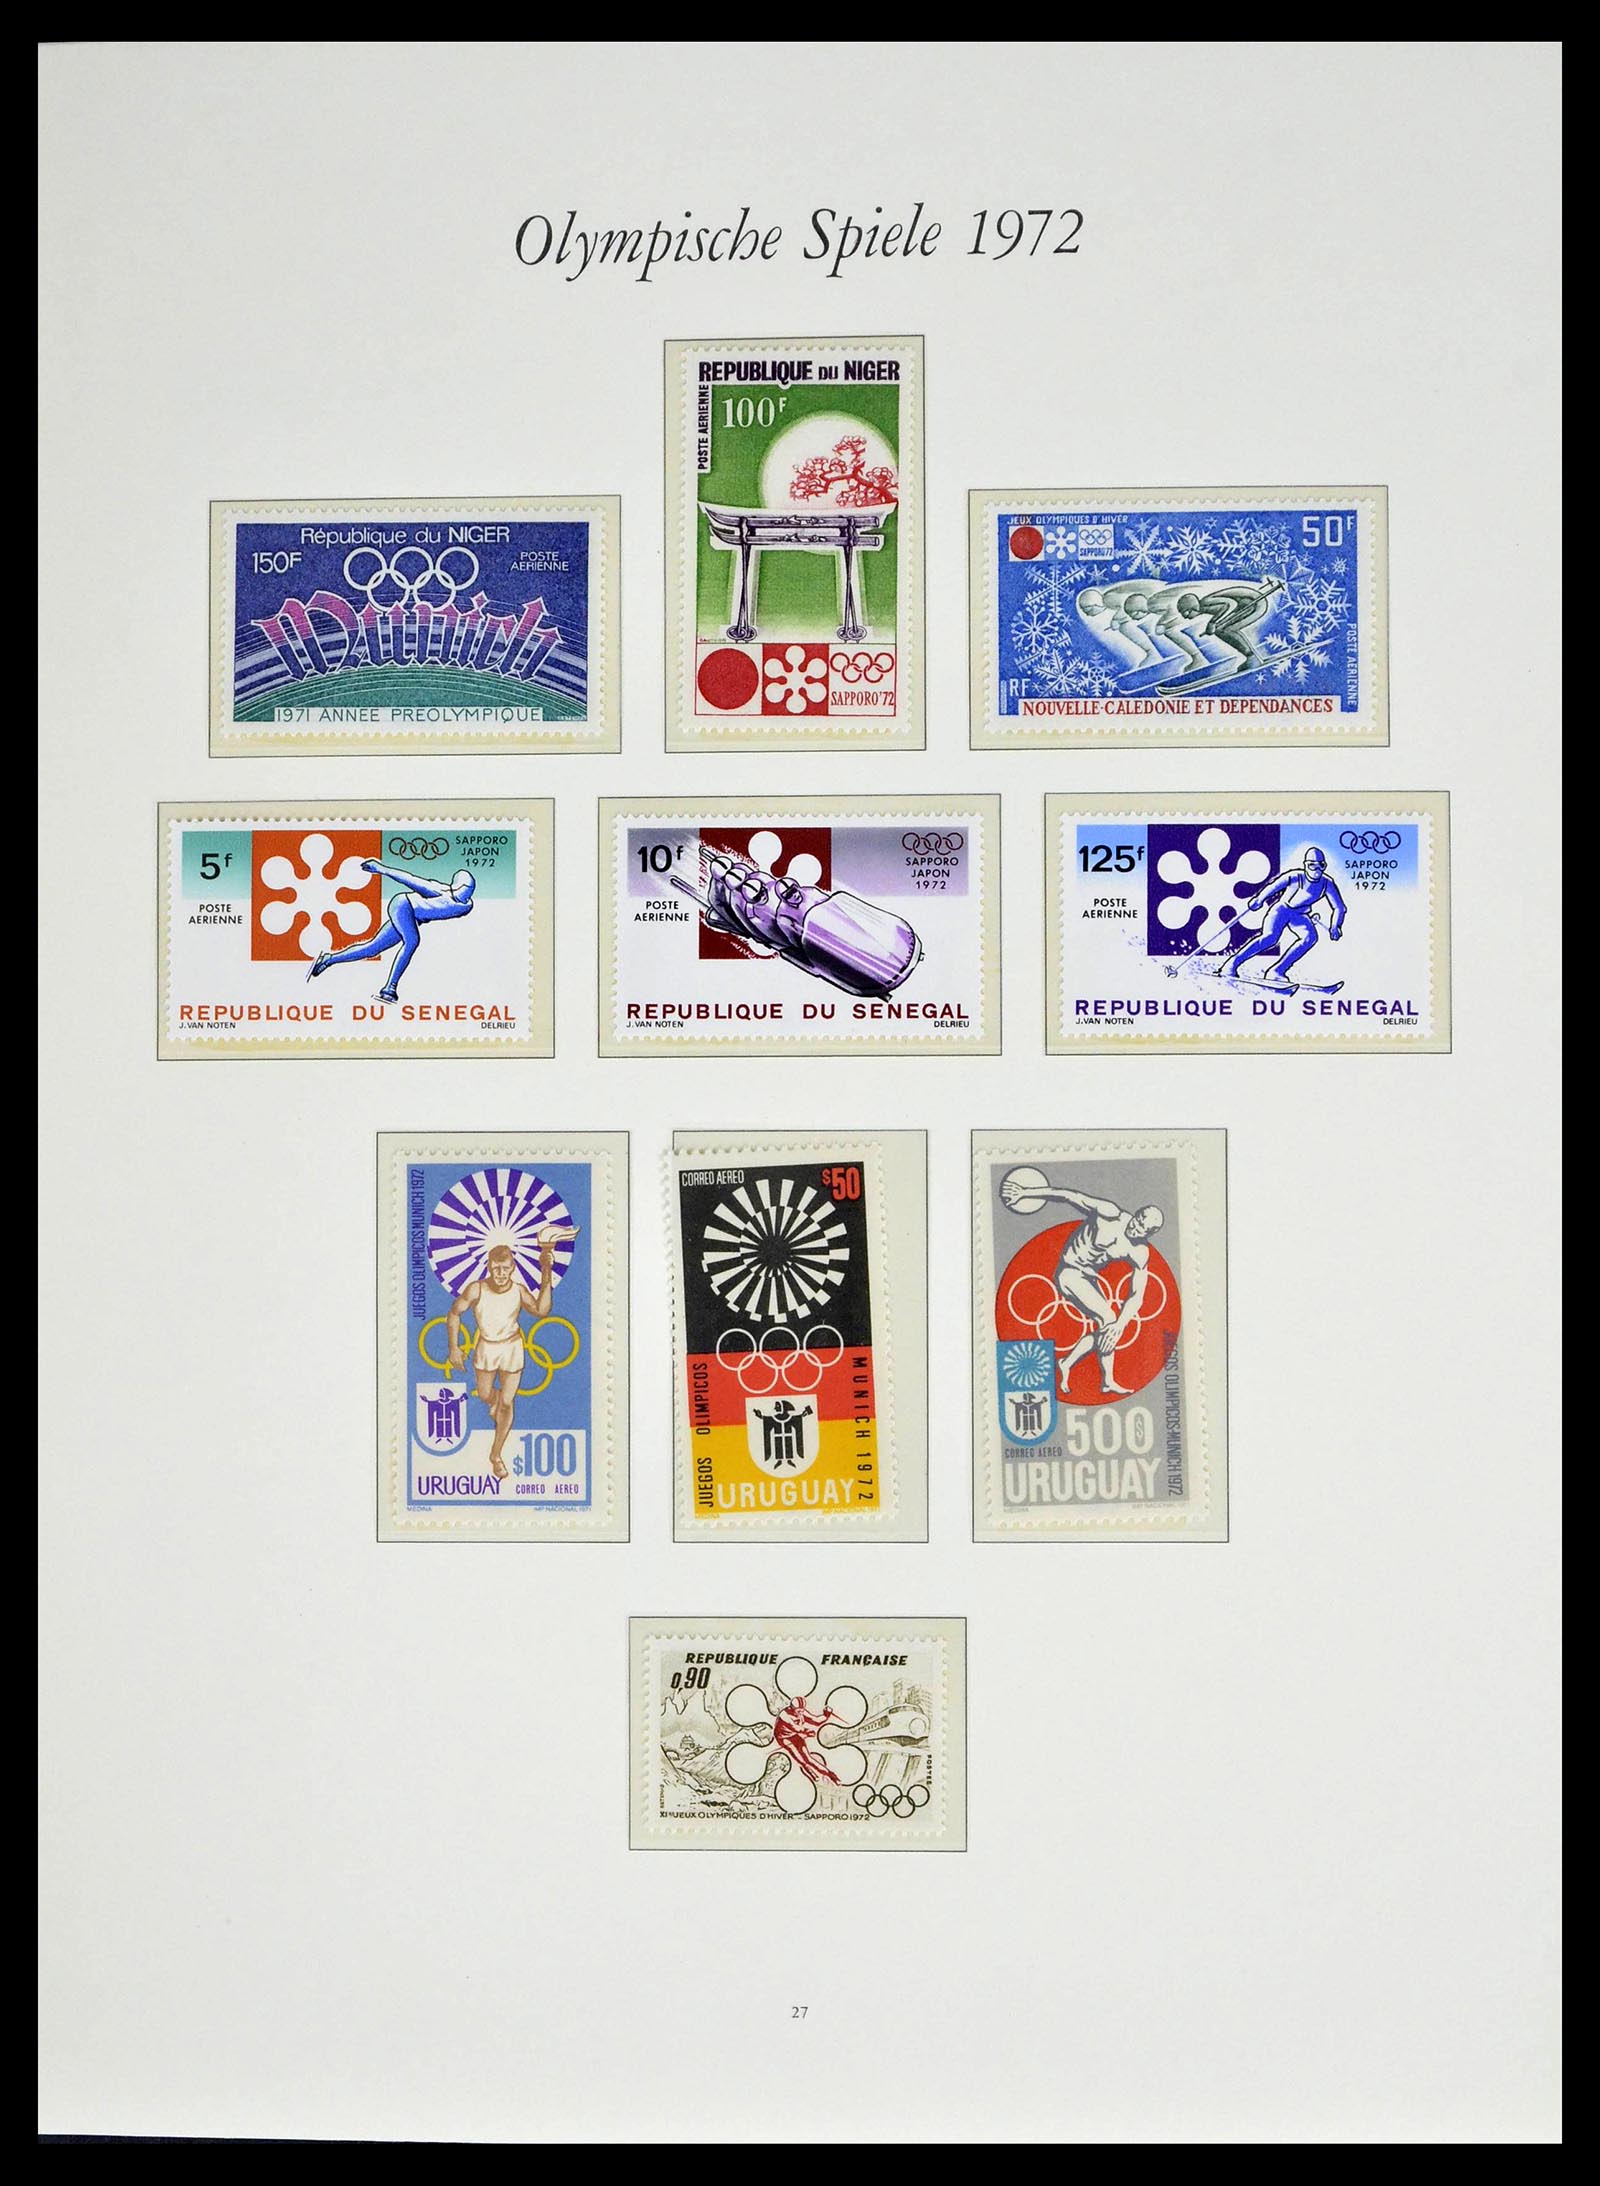 39237 0086 - Stamp collection 39237 Olympics 1972.